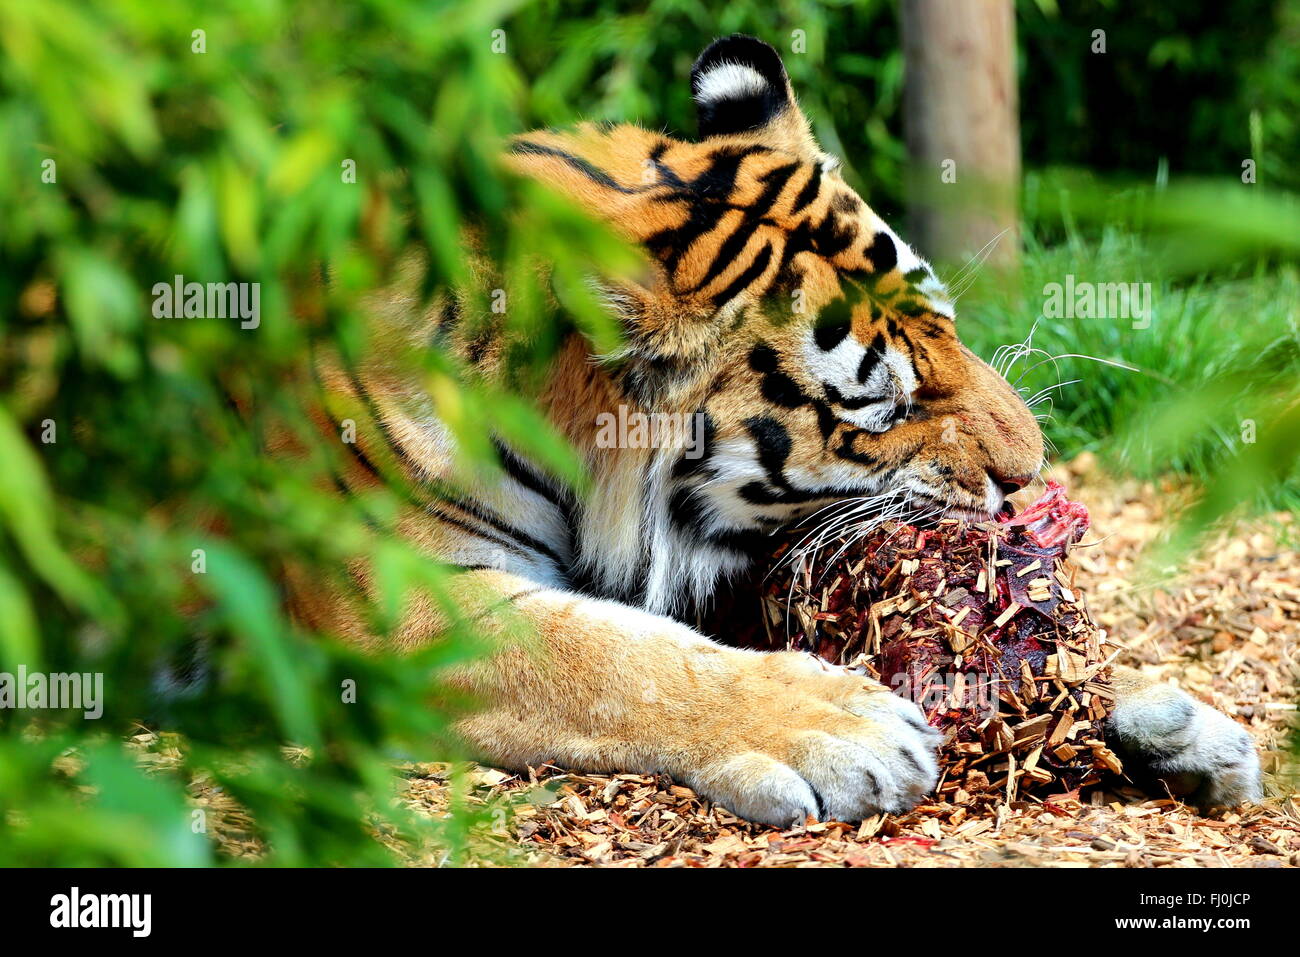 A tiger eating meat in a zoo. Stock Photo